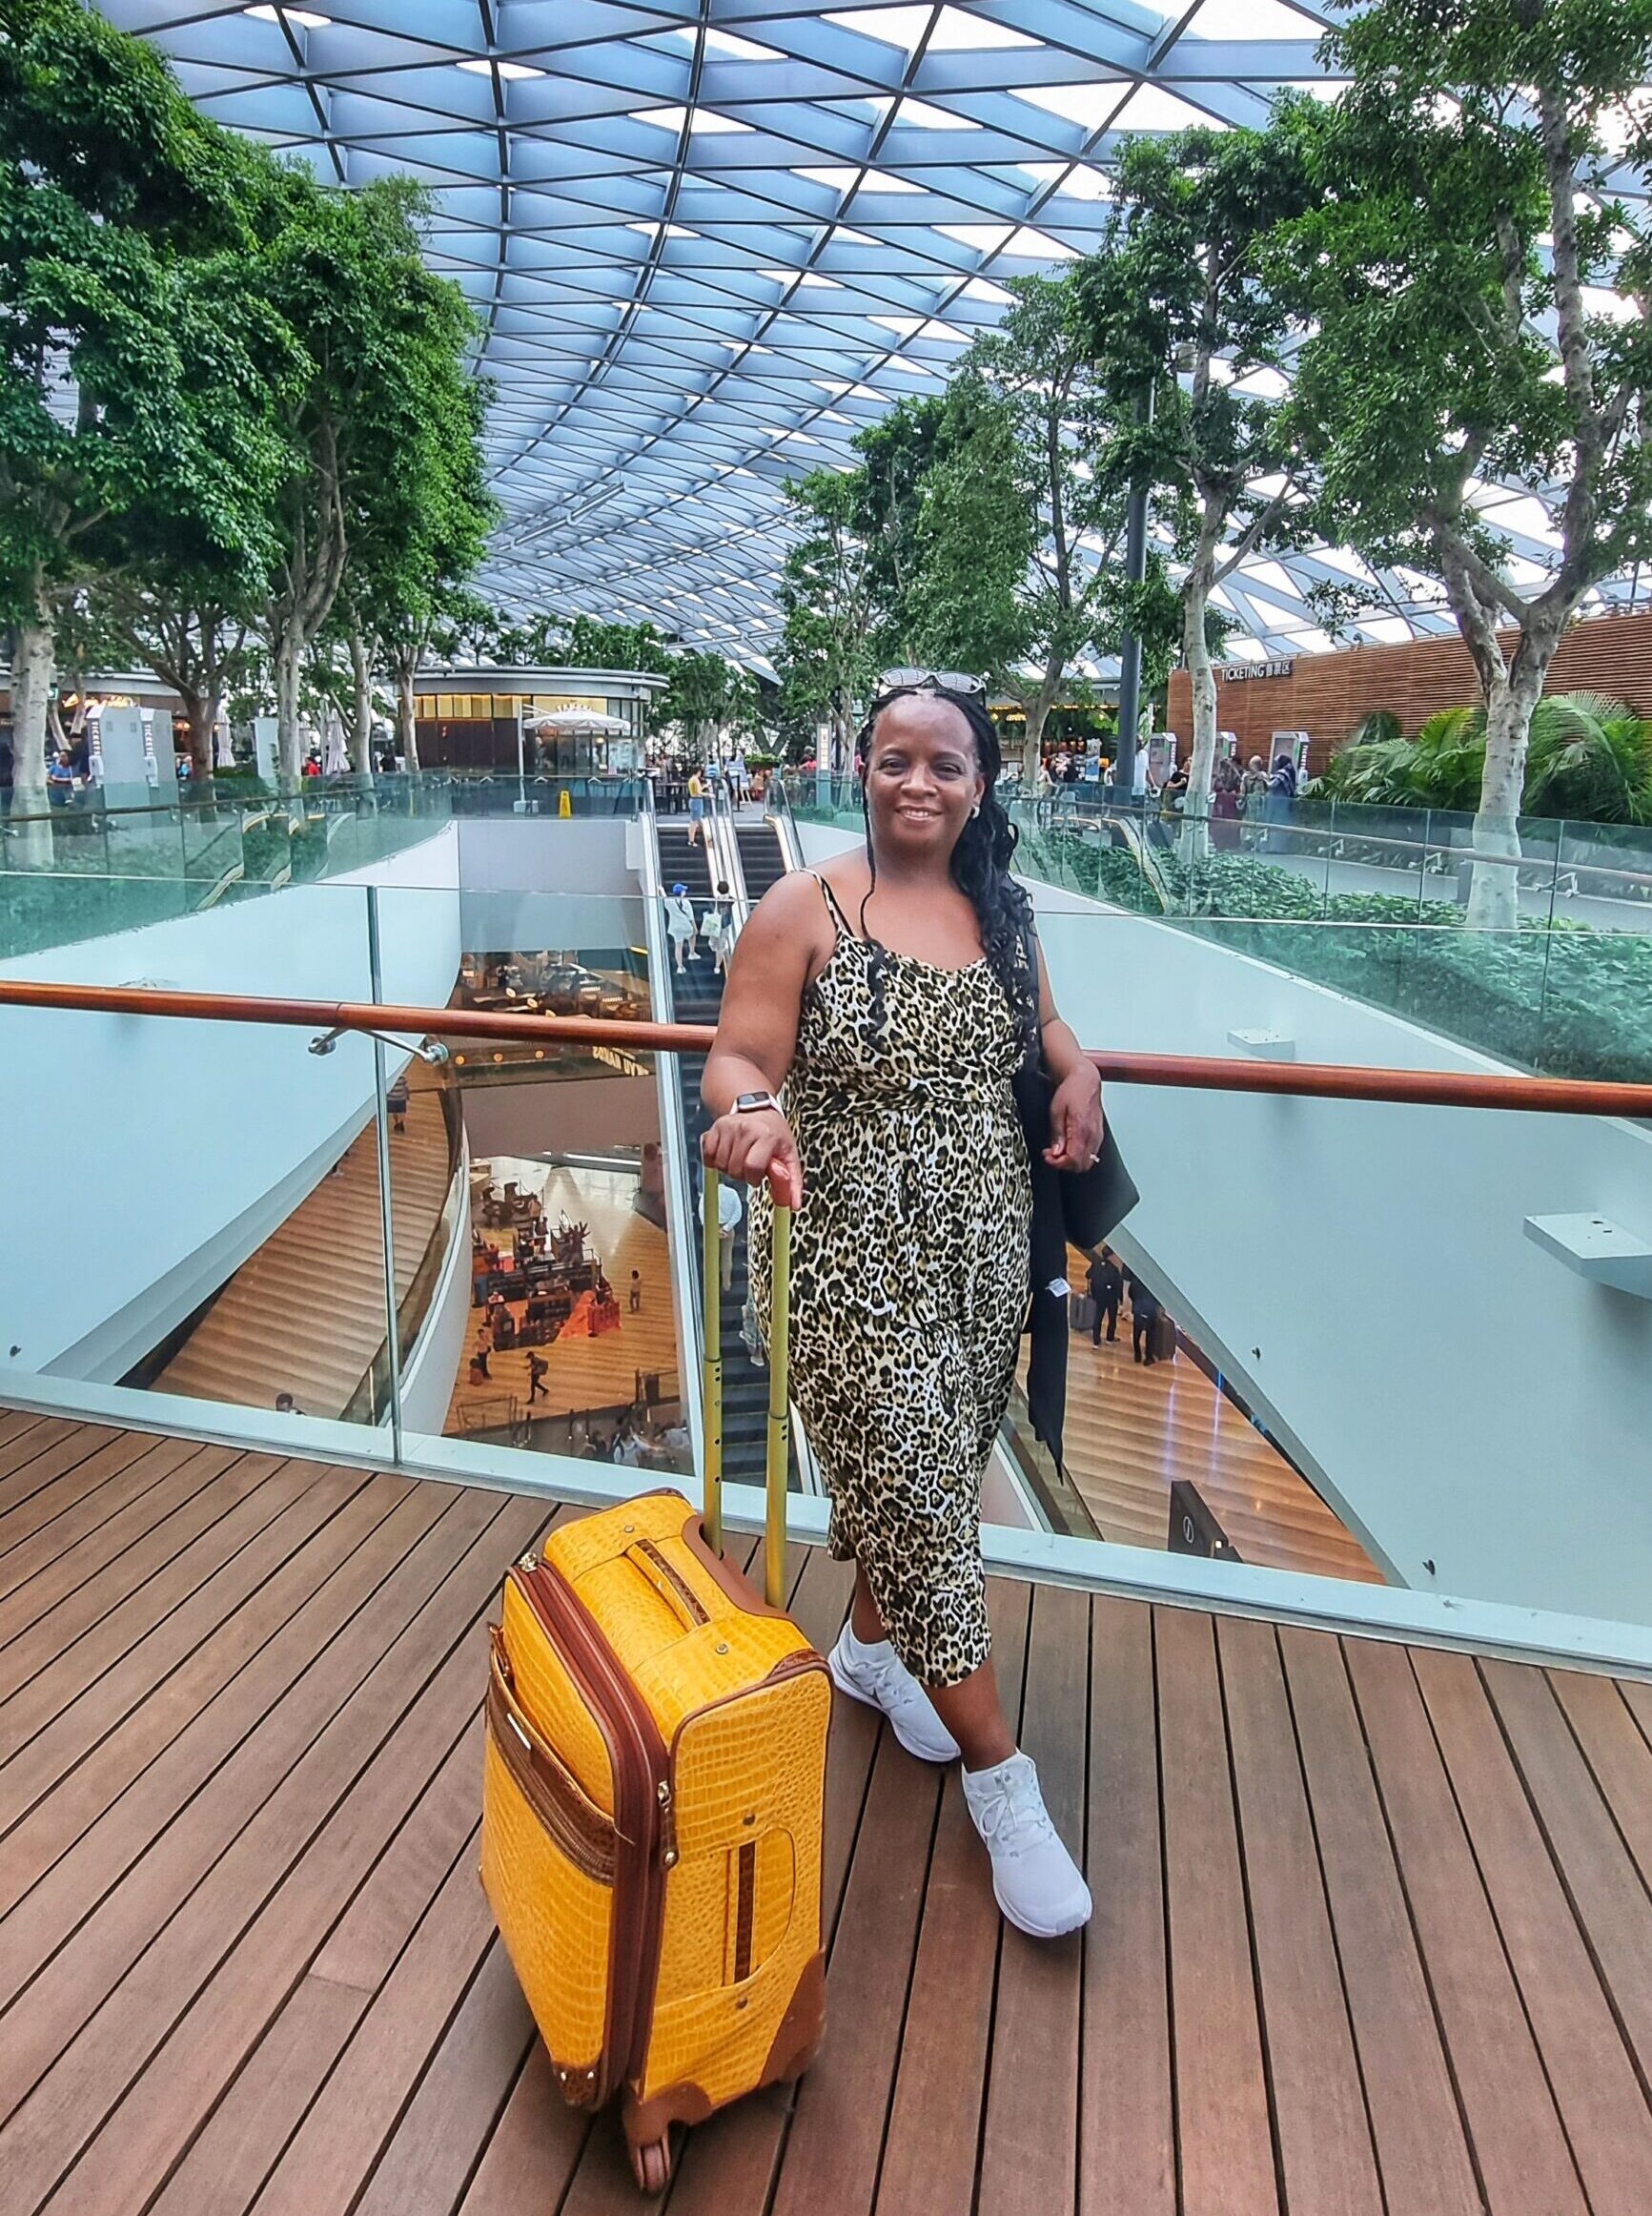 Stacey at Changi Airport with yellow carryon luggage